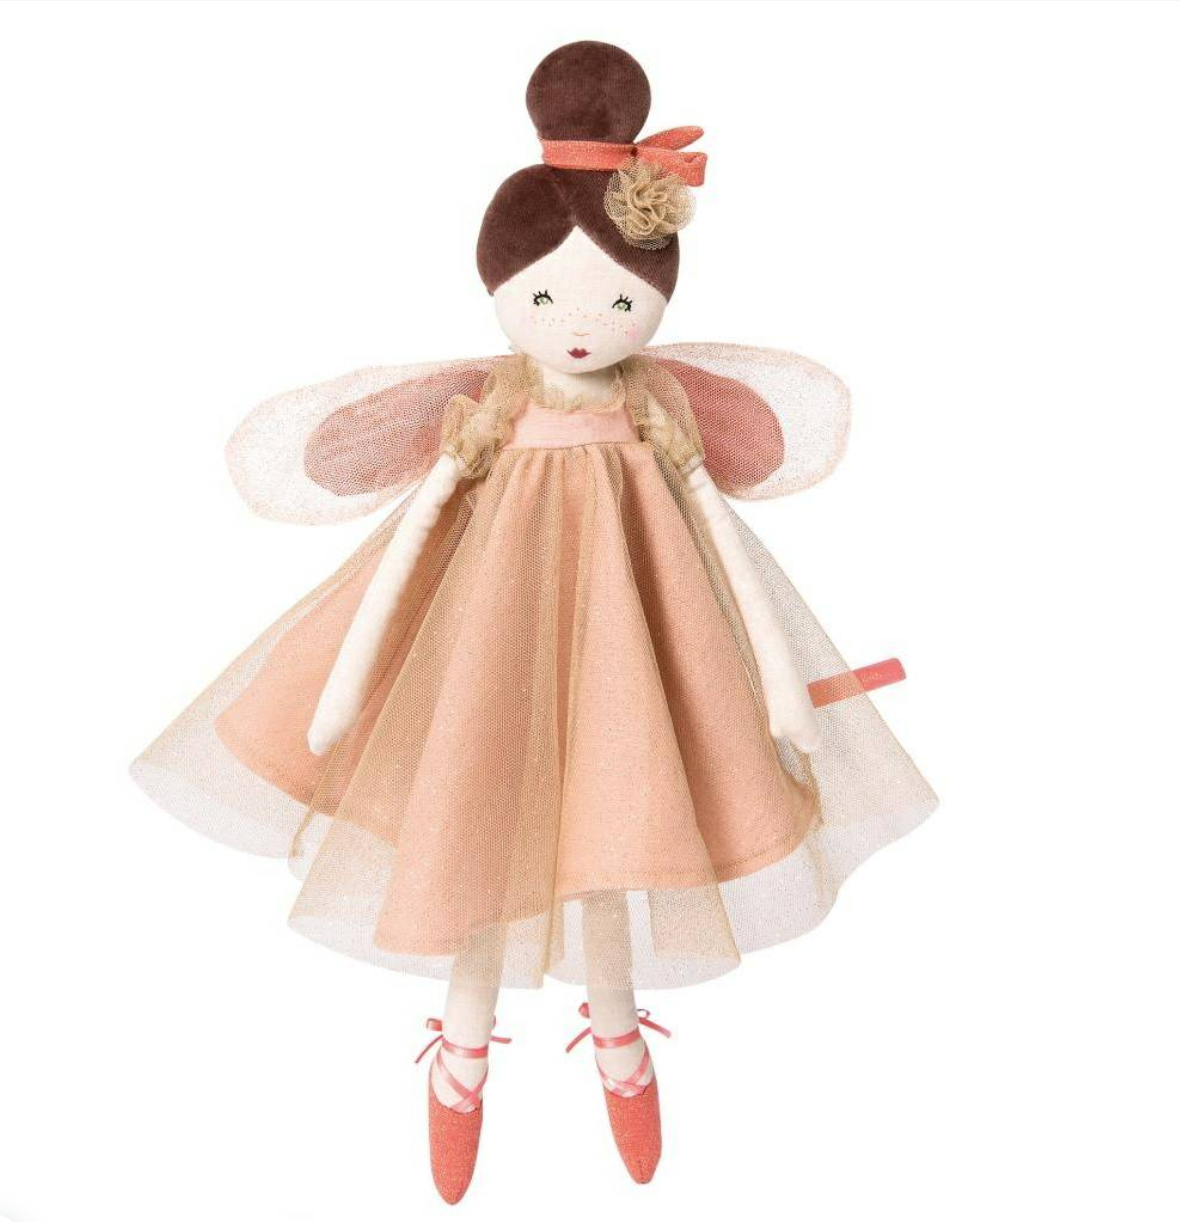 Il Etait une Fois - Enchanted Fairy Doll (45cm) By Moulin Roty